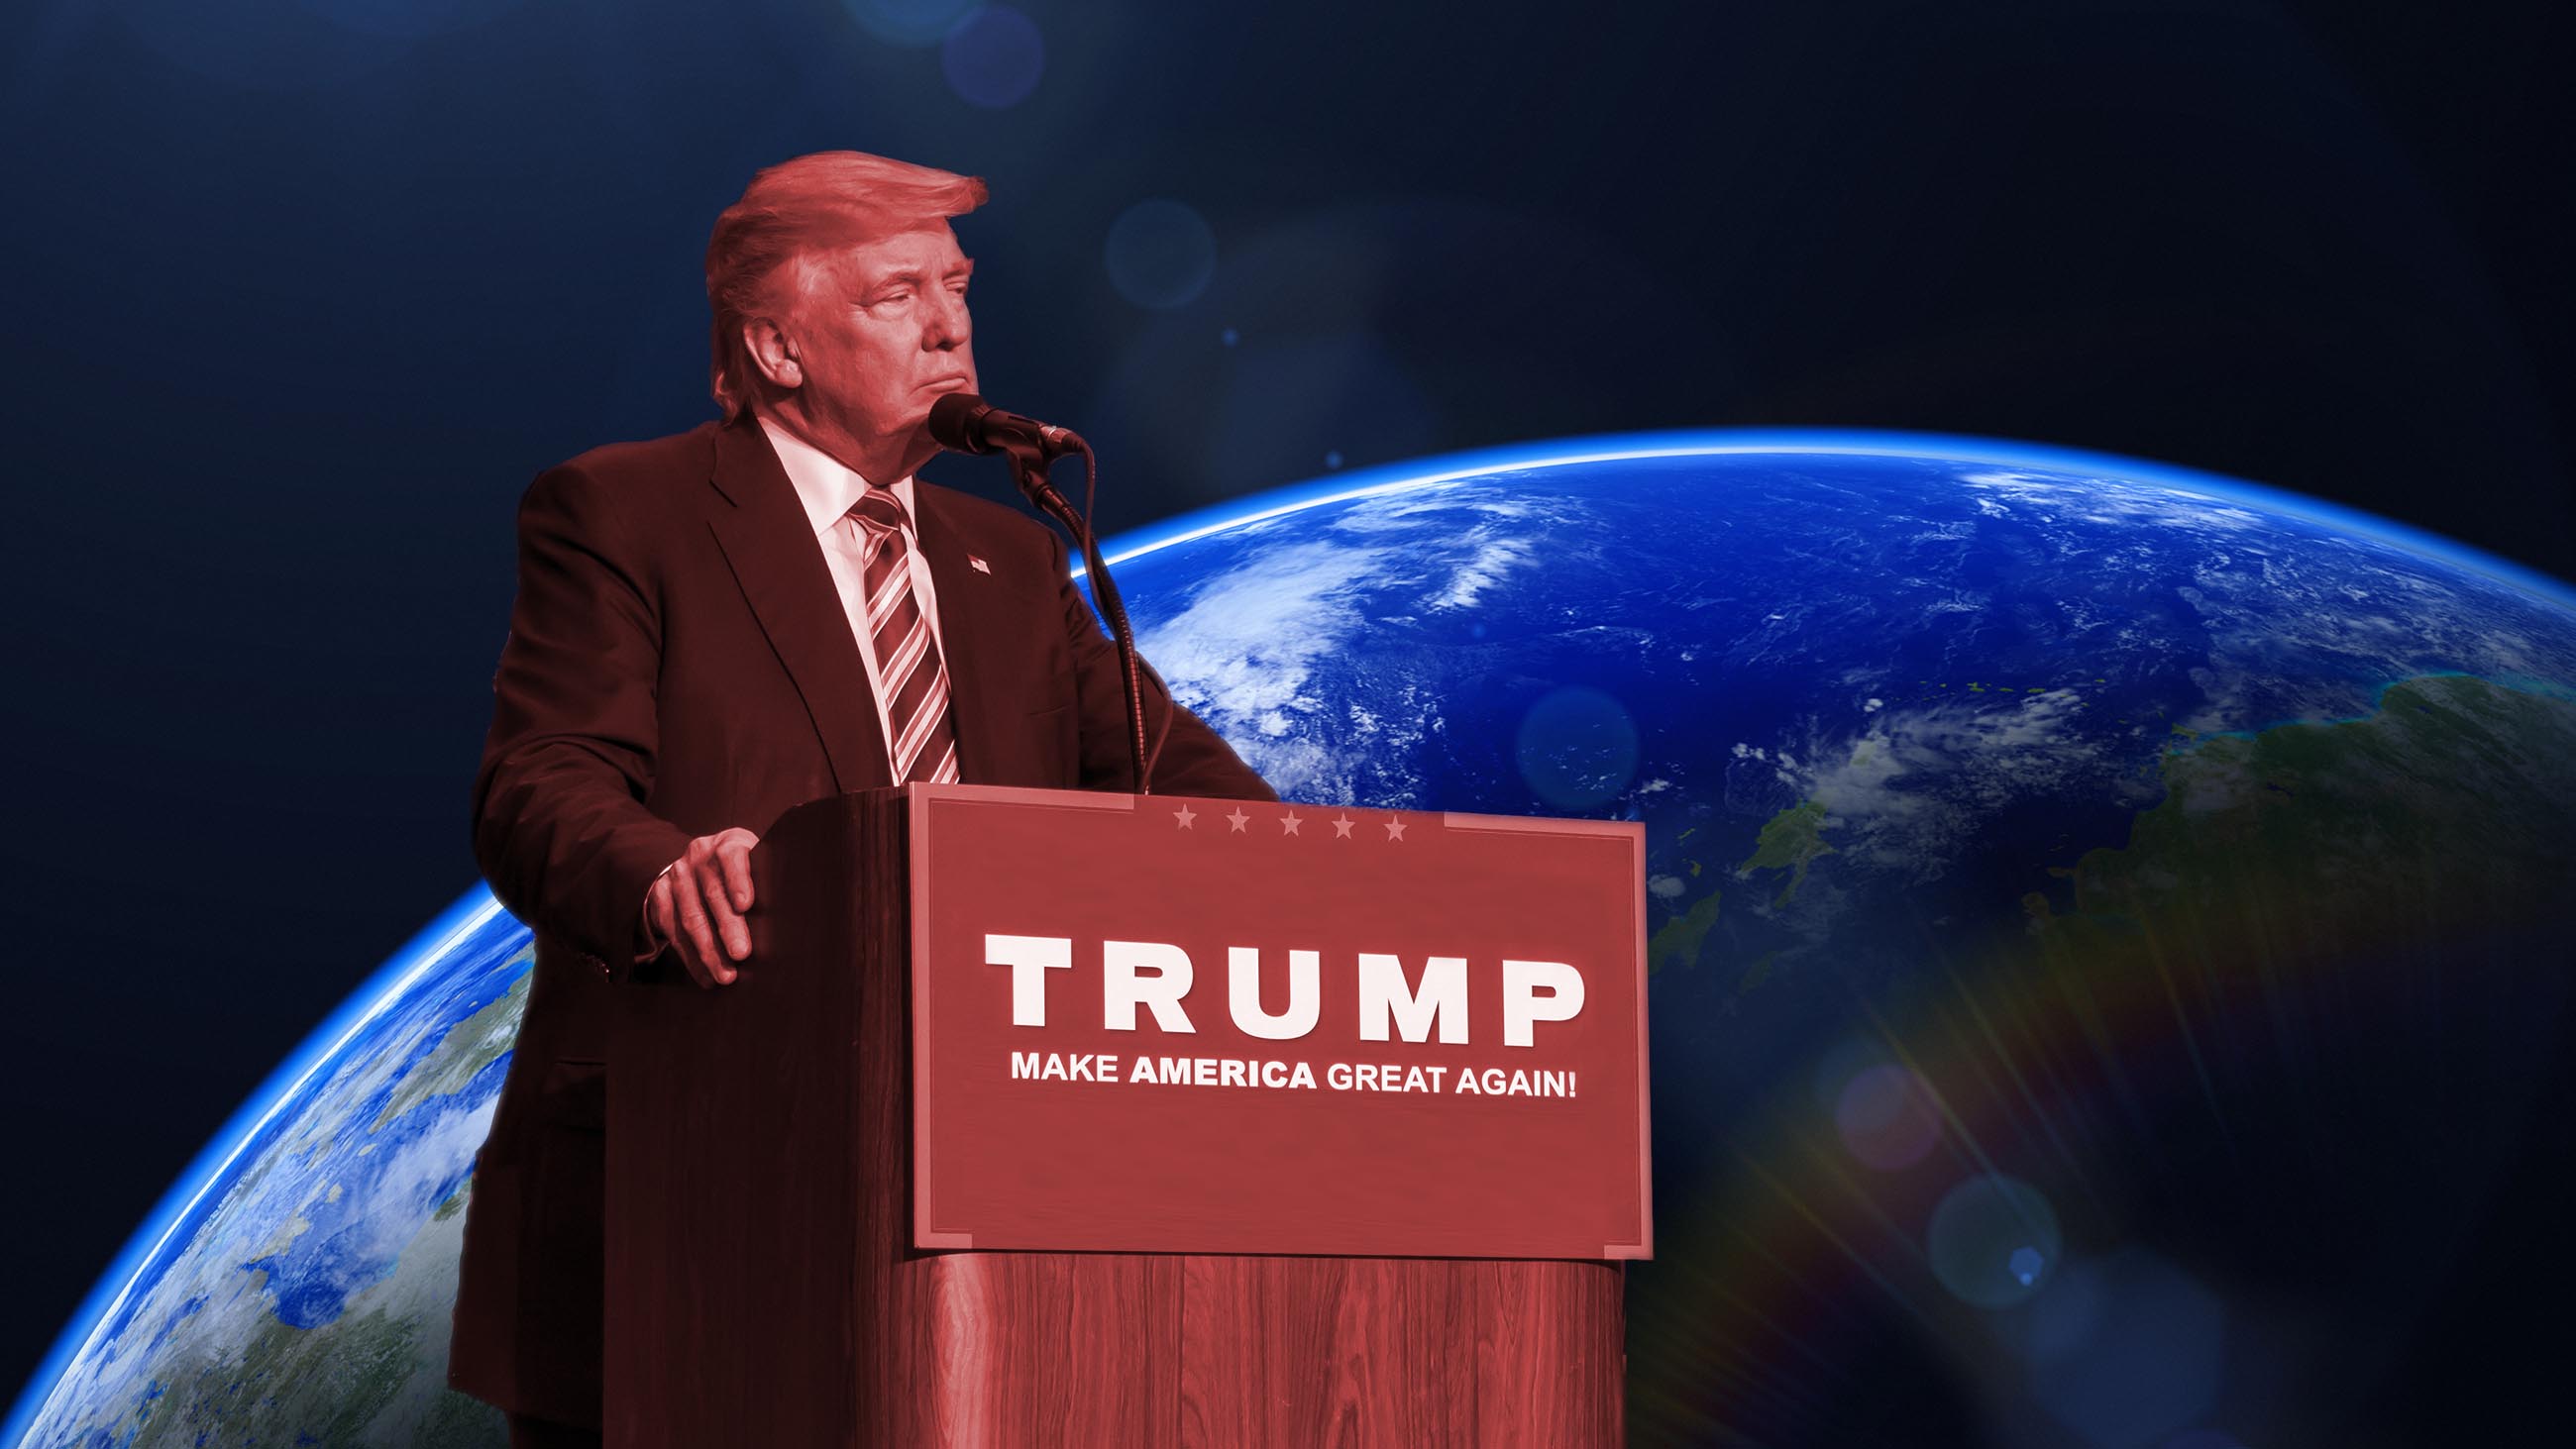 A full complement of agency and cabinet appointments, public comments, and other indicators suggest climate science under Trump will suffer. So will the planet.